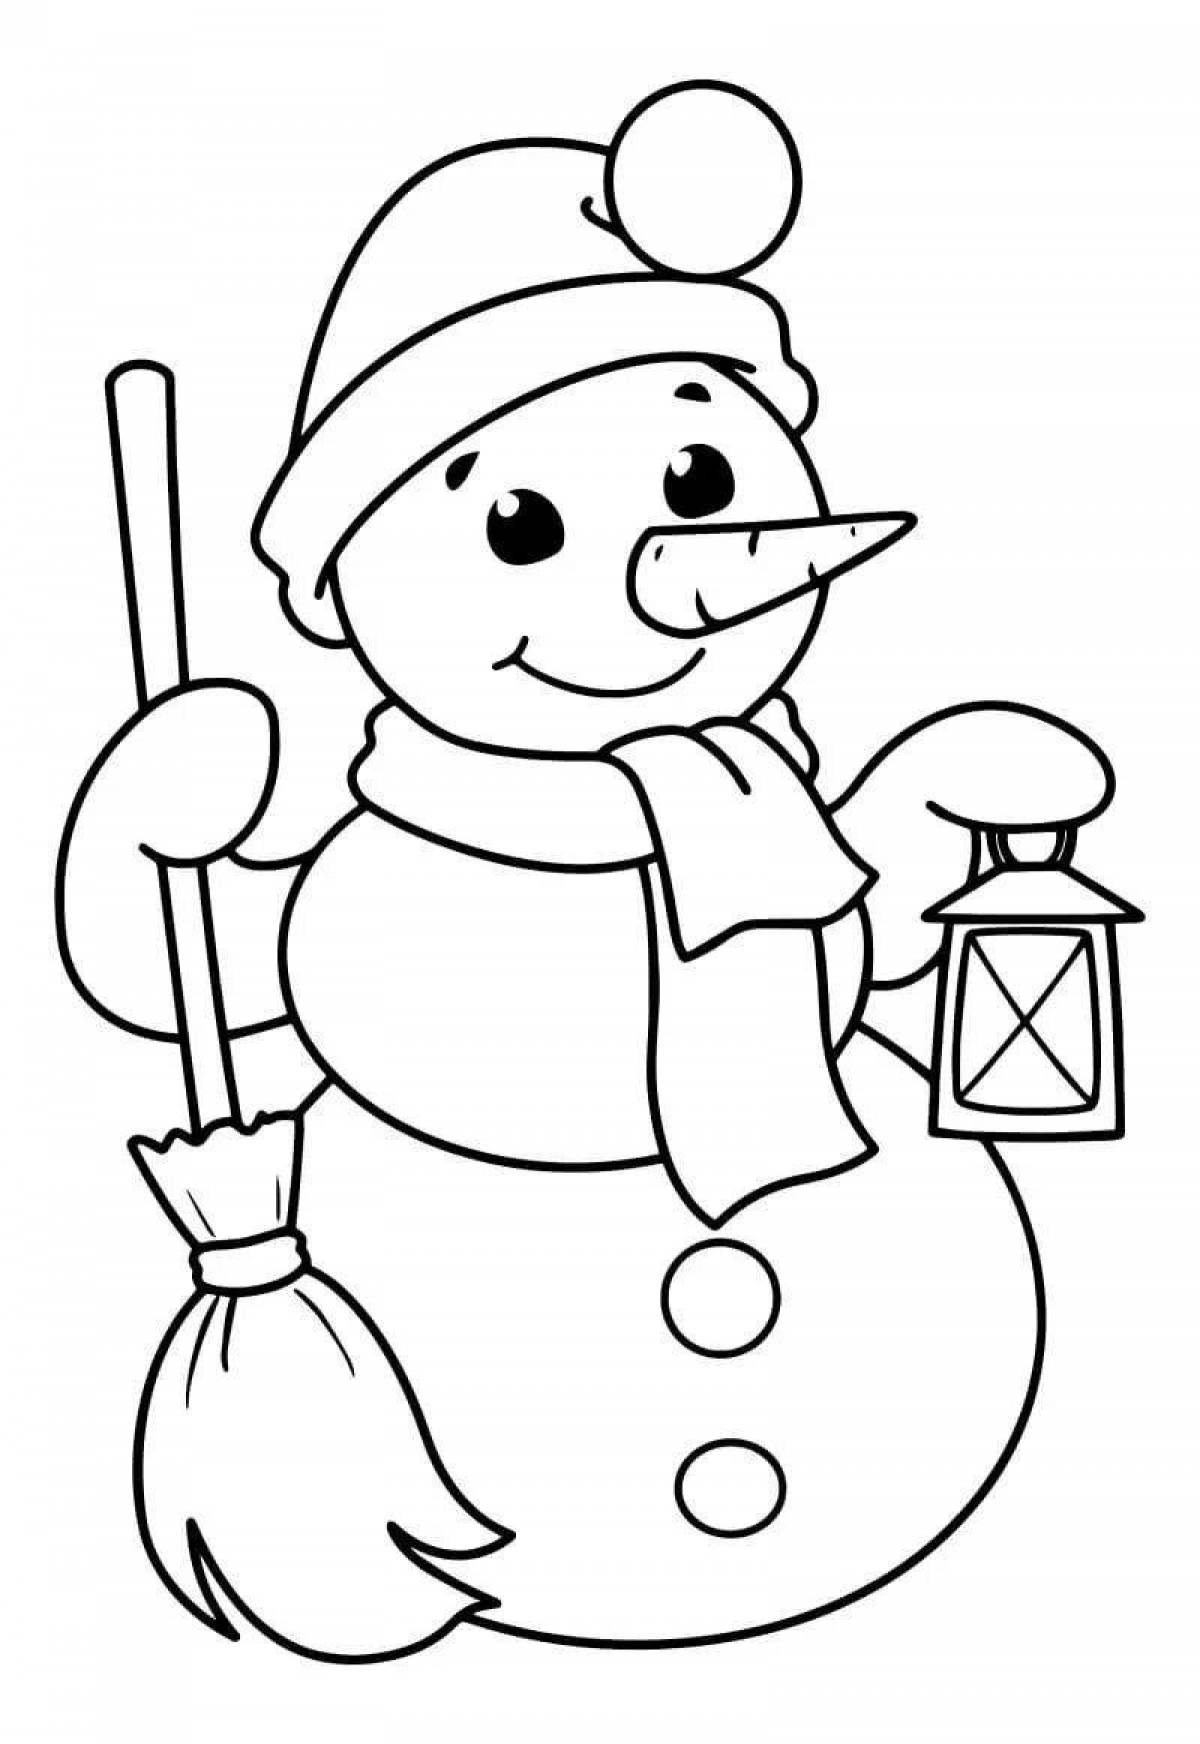 Coloring day of the enthusiastic snowman